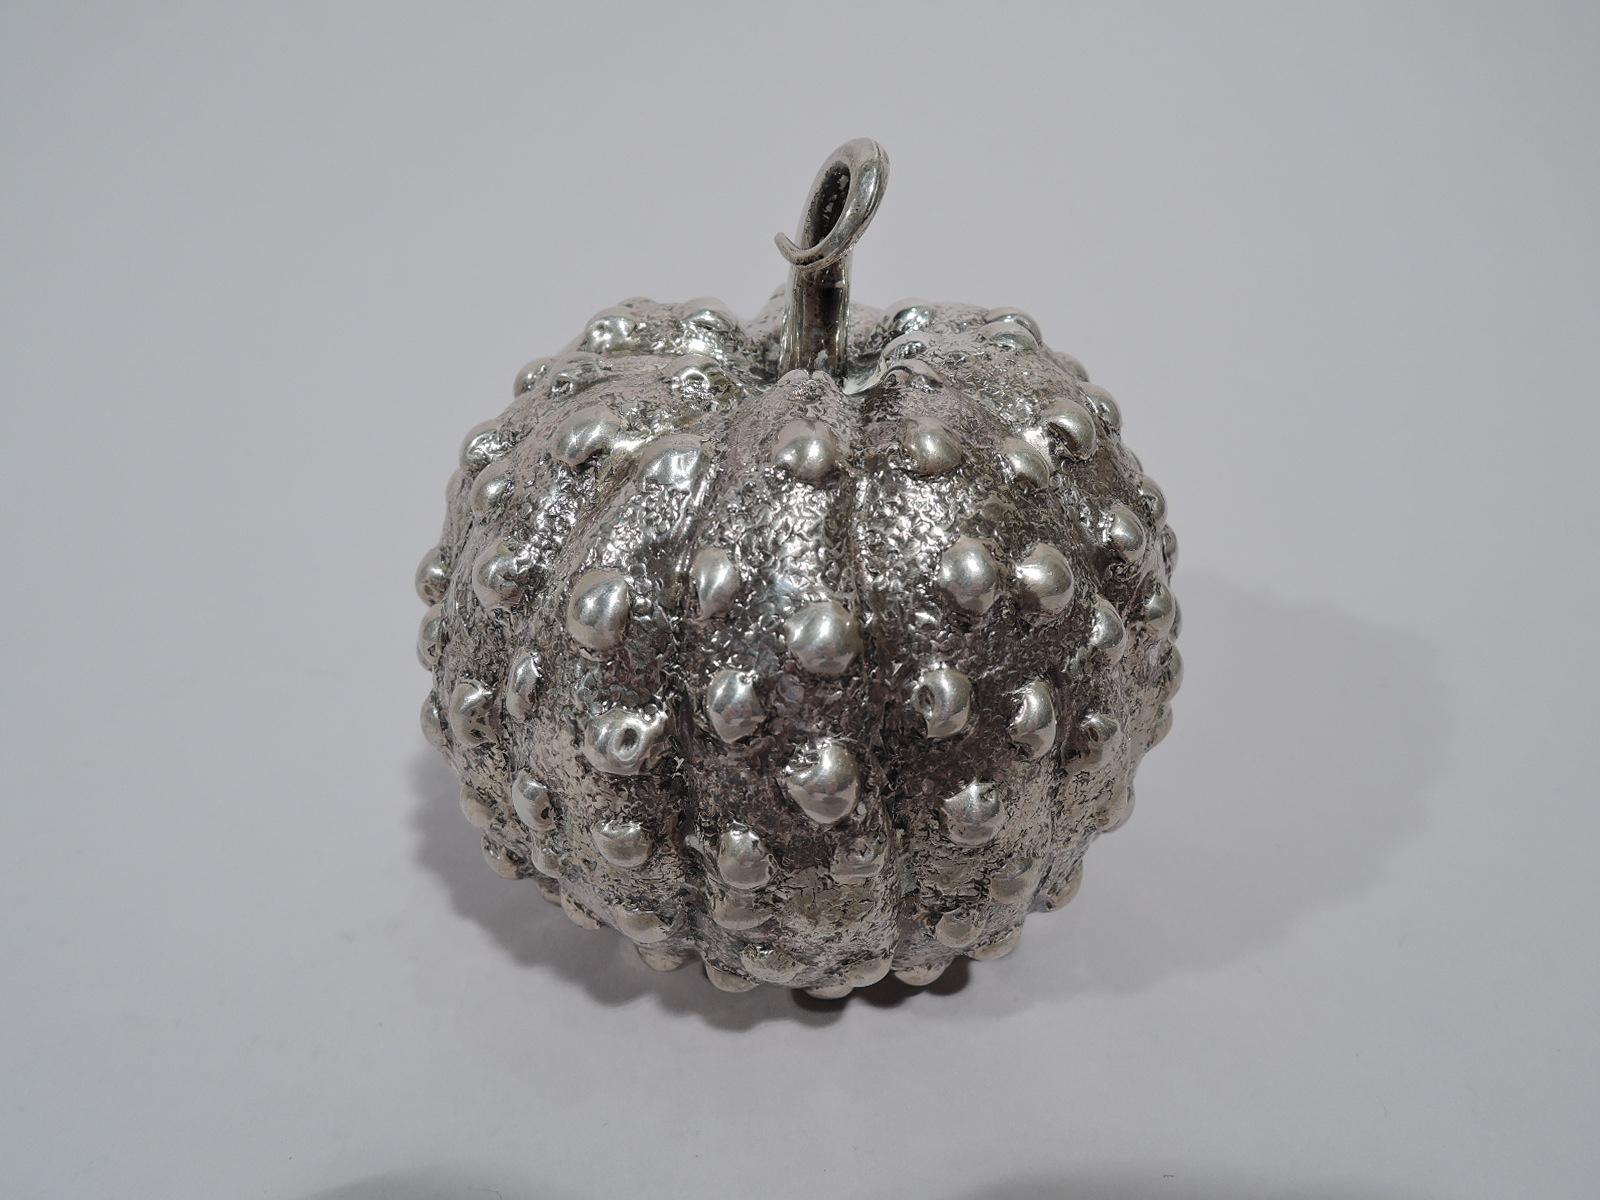 Midcentury silver figural lighter. Made by Mario Buccellati in Italy. Gourd-form body with lobing and irregular studding on stippled skin; curlicue stem. Detachable lighter. Marked “Mario / Buccellati / SRL”. Weight (without lighter): 3.5 troy